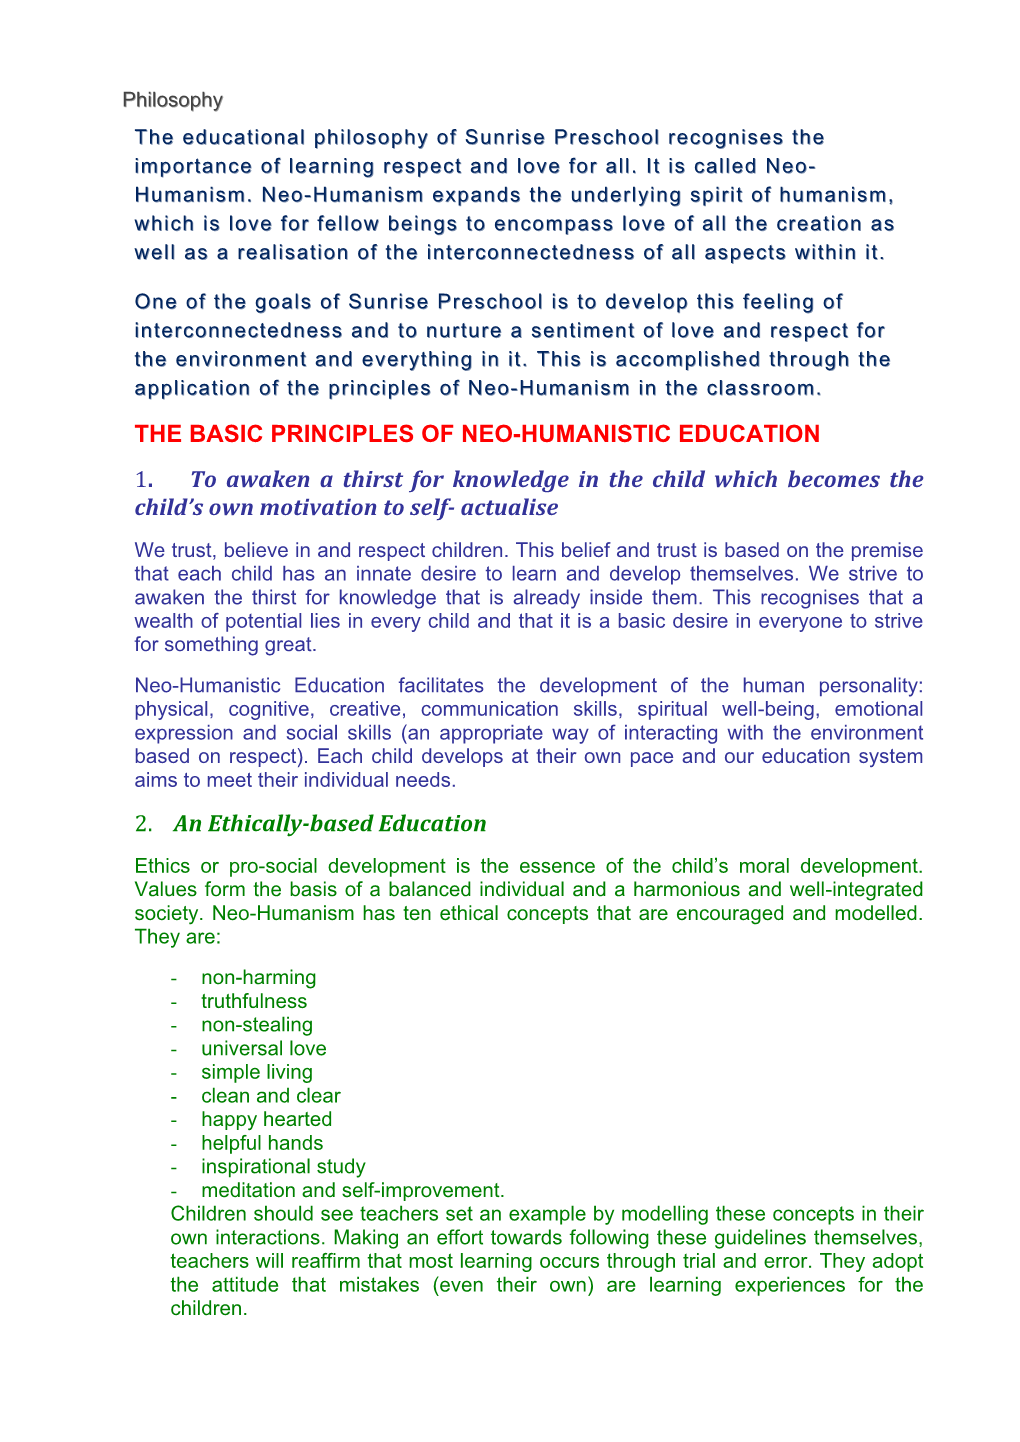 The Basic Principles of Neo-Humanistic Education 1